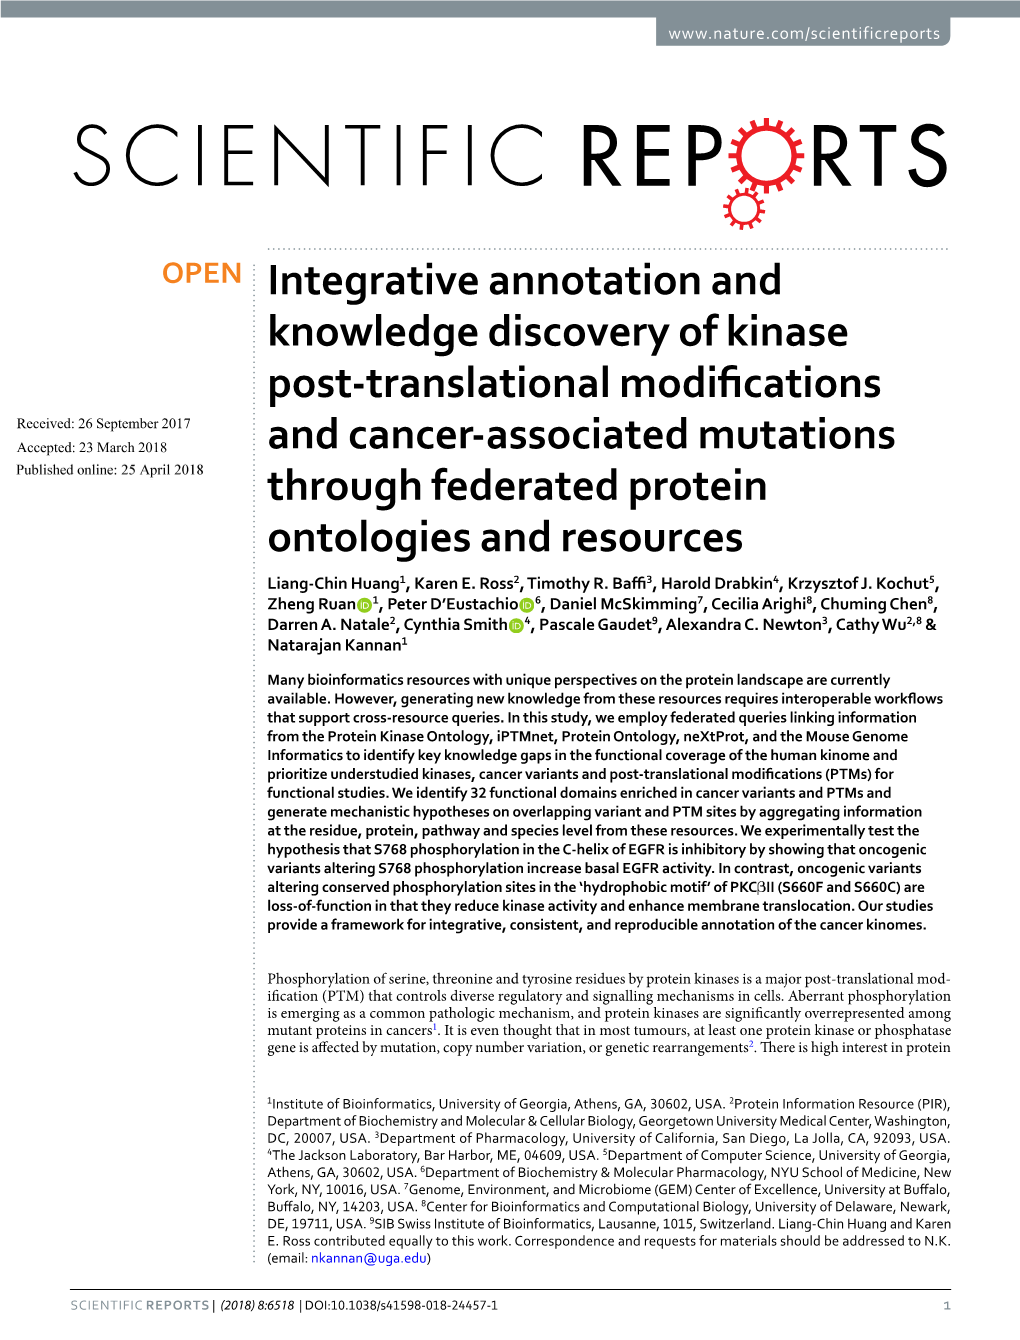 Integrative Annotation and Knowledge Discovery of Kinase Post